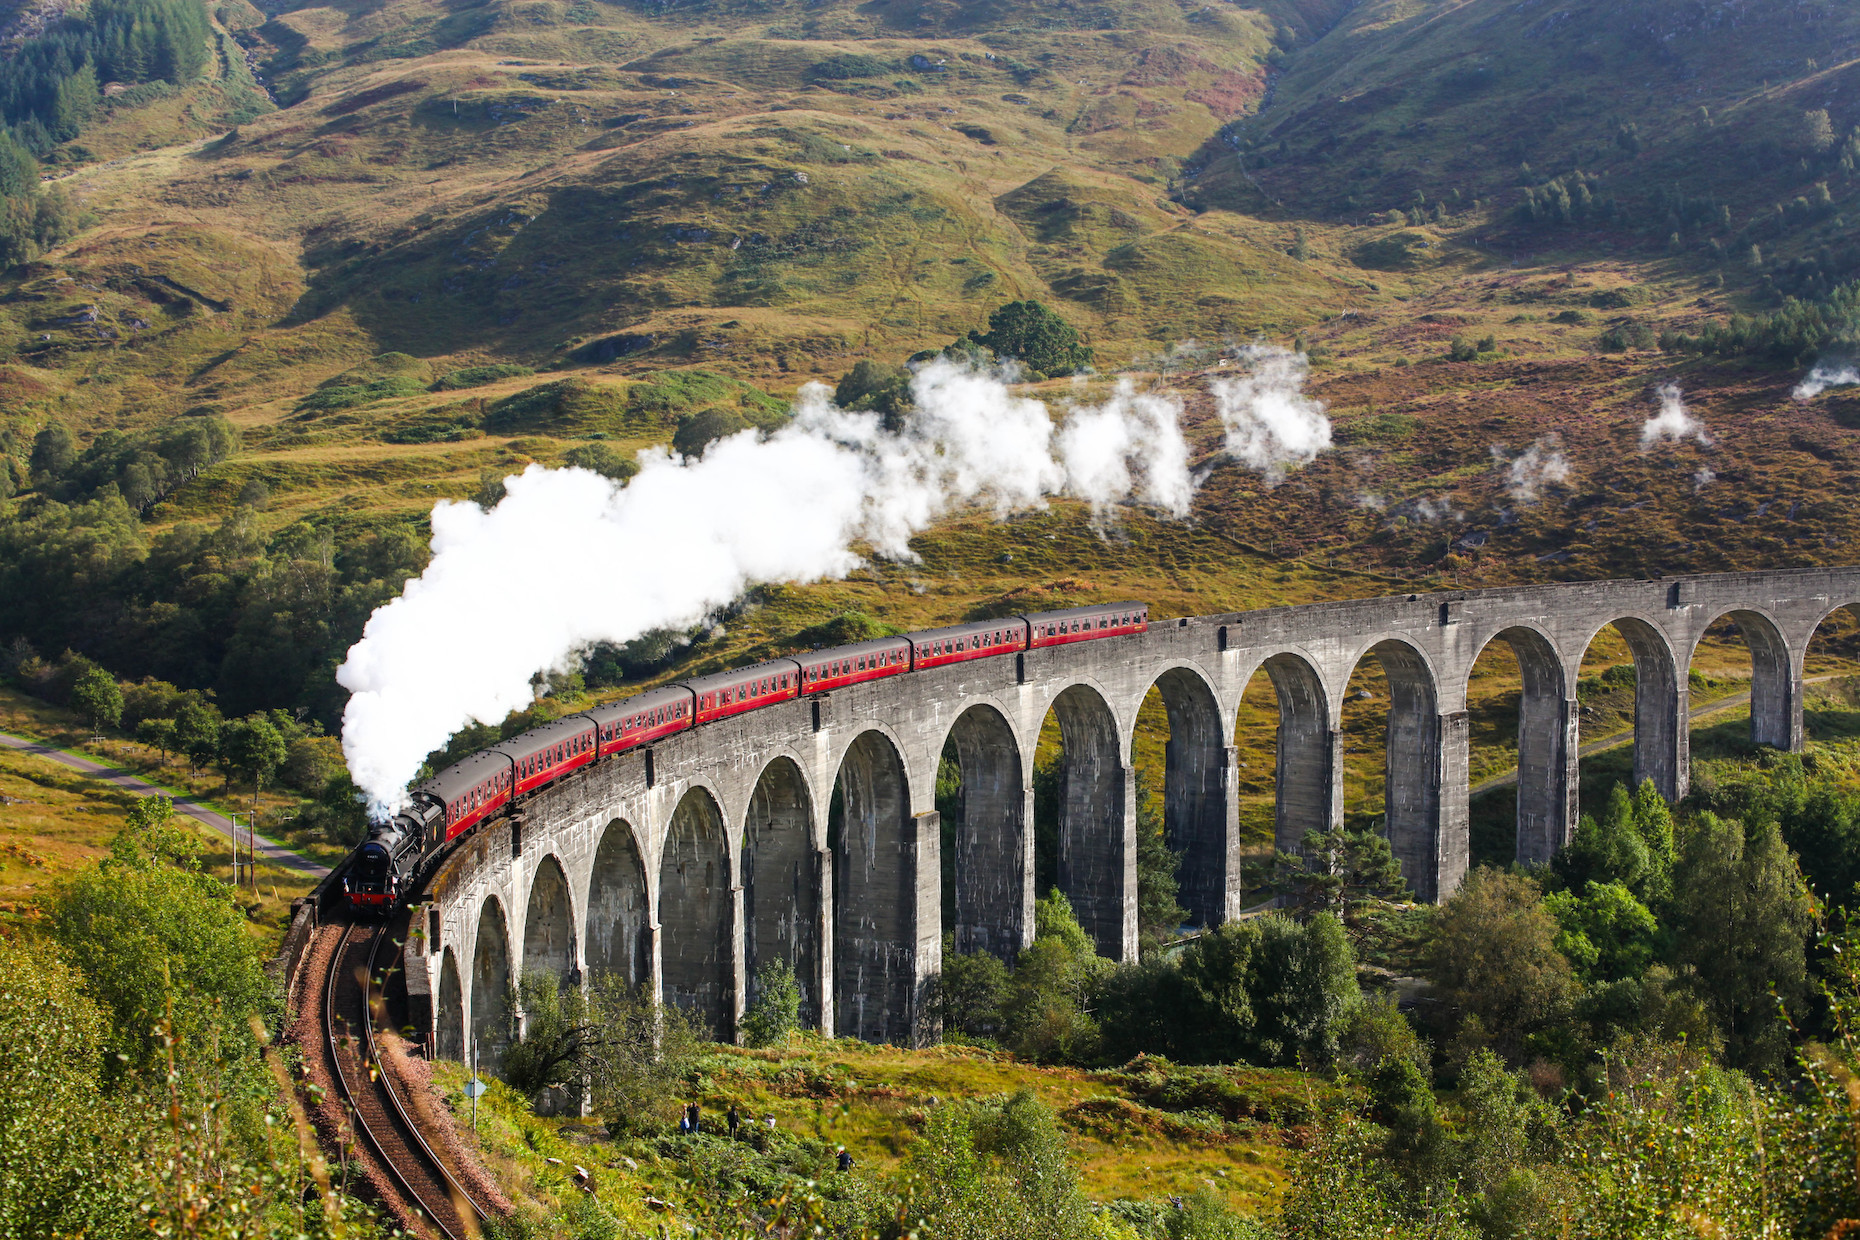 Harry Potter fans are in for a treat when they visit Scotland as J.K. Rowling drew inspiration from numerous legendary sites. Start by climbing aboard the Hogwarts Express (actually called the Jacobite Steam Train) and crossing the <a href="https://independenttravelcats.com/harry-potter-filming-locations-in-scotland/" rel="noreferrer noopener">Glenfinnan Viaduct</a> in the Highlands. From there, you’ll see Loch Shiel and the mountains over which Buckbeak and Harry Potter flew in the third film of the series. Then, for a stroll along Diagon Alley, head to Victoria Street in Edinburgh.